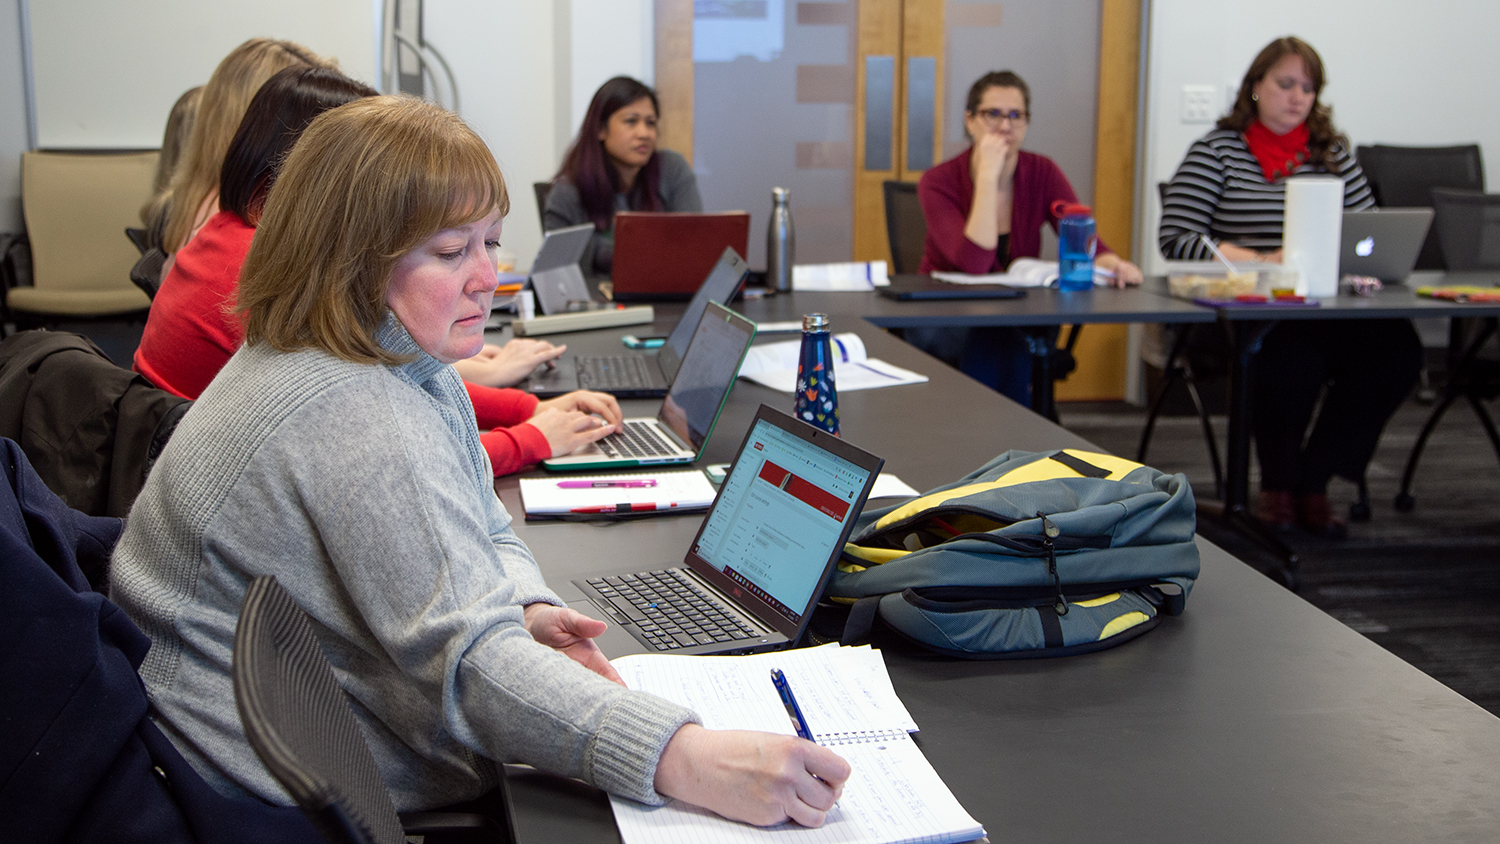 Christine Cranford writes down important notes during a face-to-face meeting of the Online Course Improvement Program in spring 2019. Christine is sitting at a table with other people in the distance.